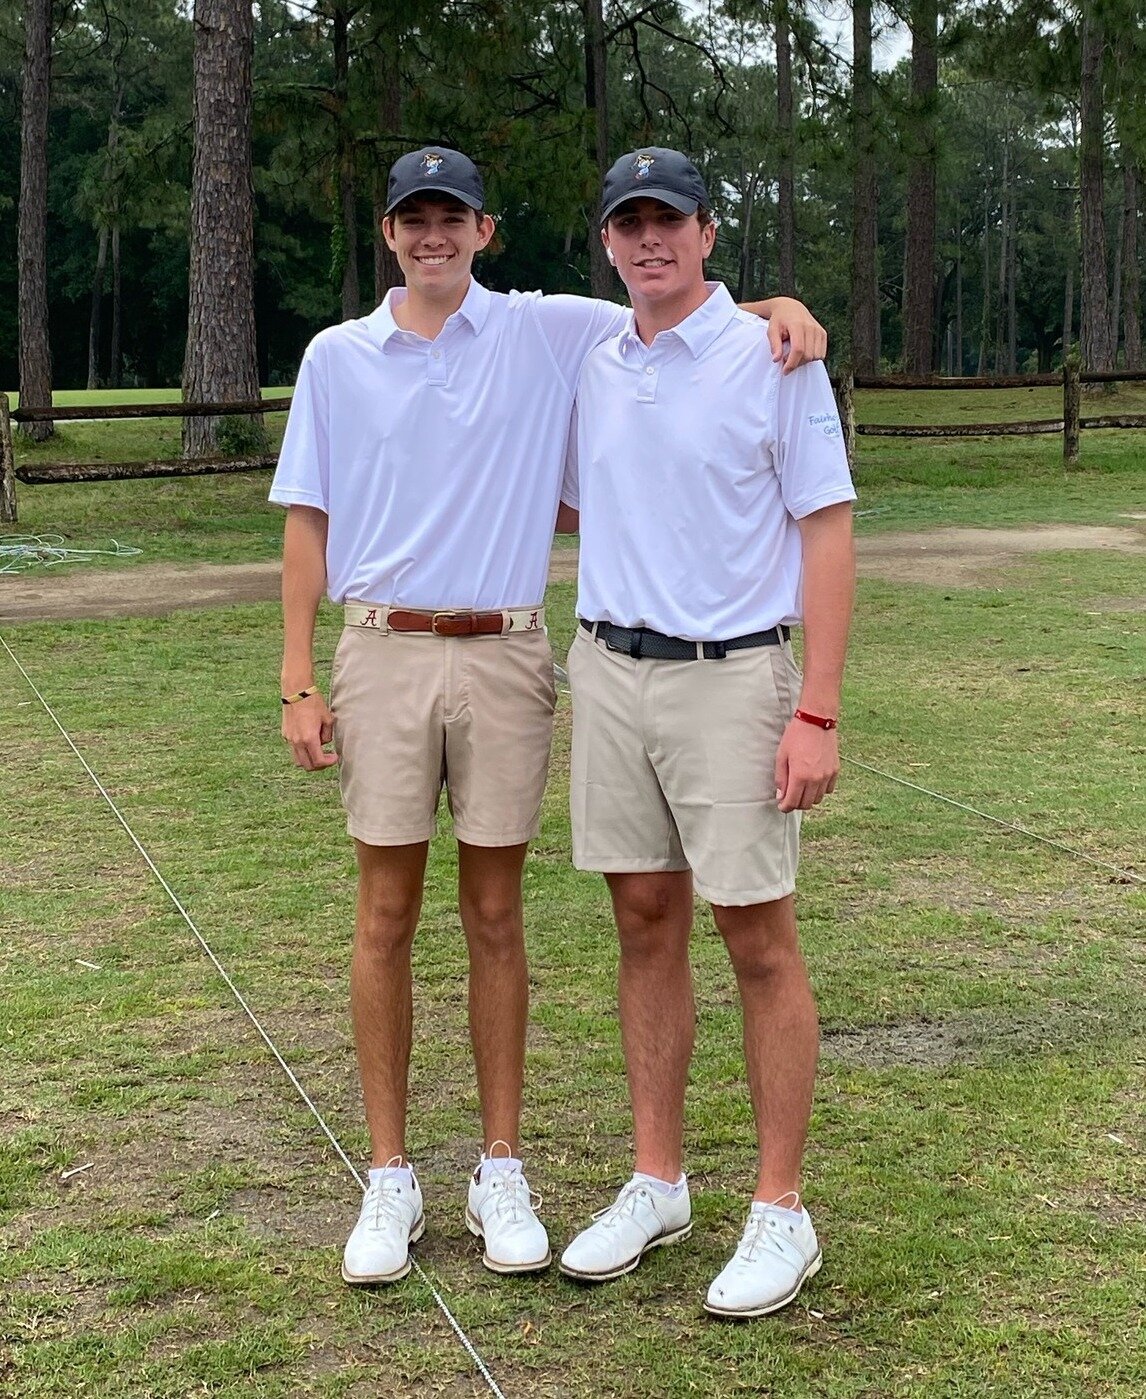 Fairhope Pirates Miles Miller and Trip Duke were recently named to the AHSAA’s South All-Star boys’ golf roster as part of seven golf players set to represent Baldwin County at this summer’s North-South All-Star Week in Montgomery.